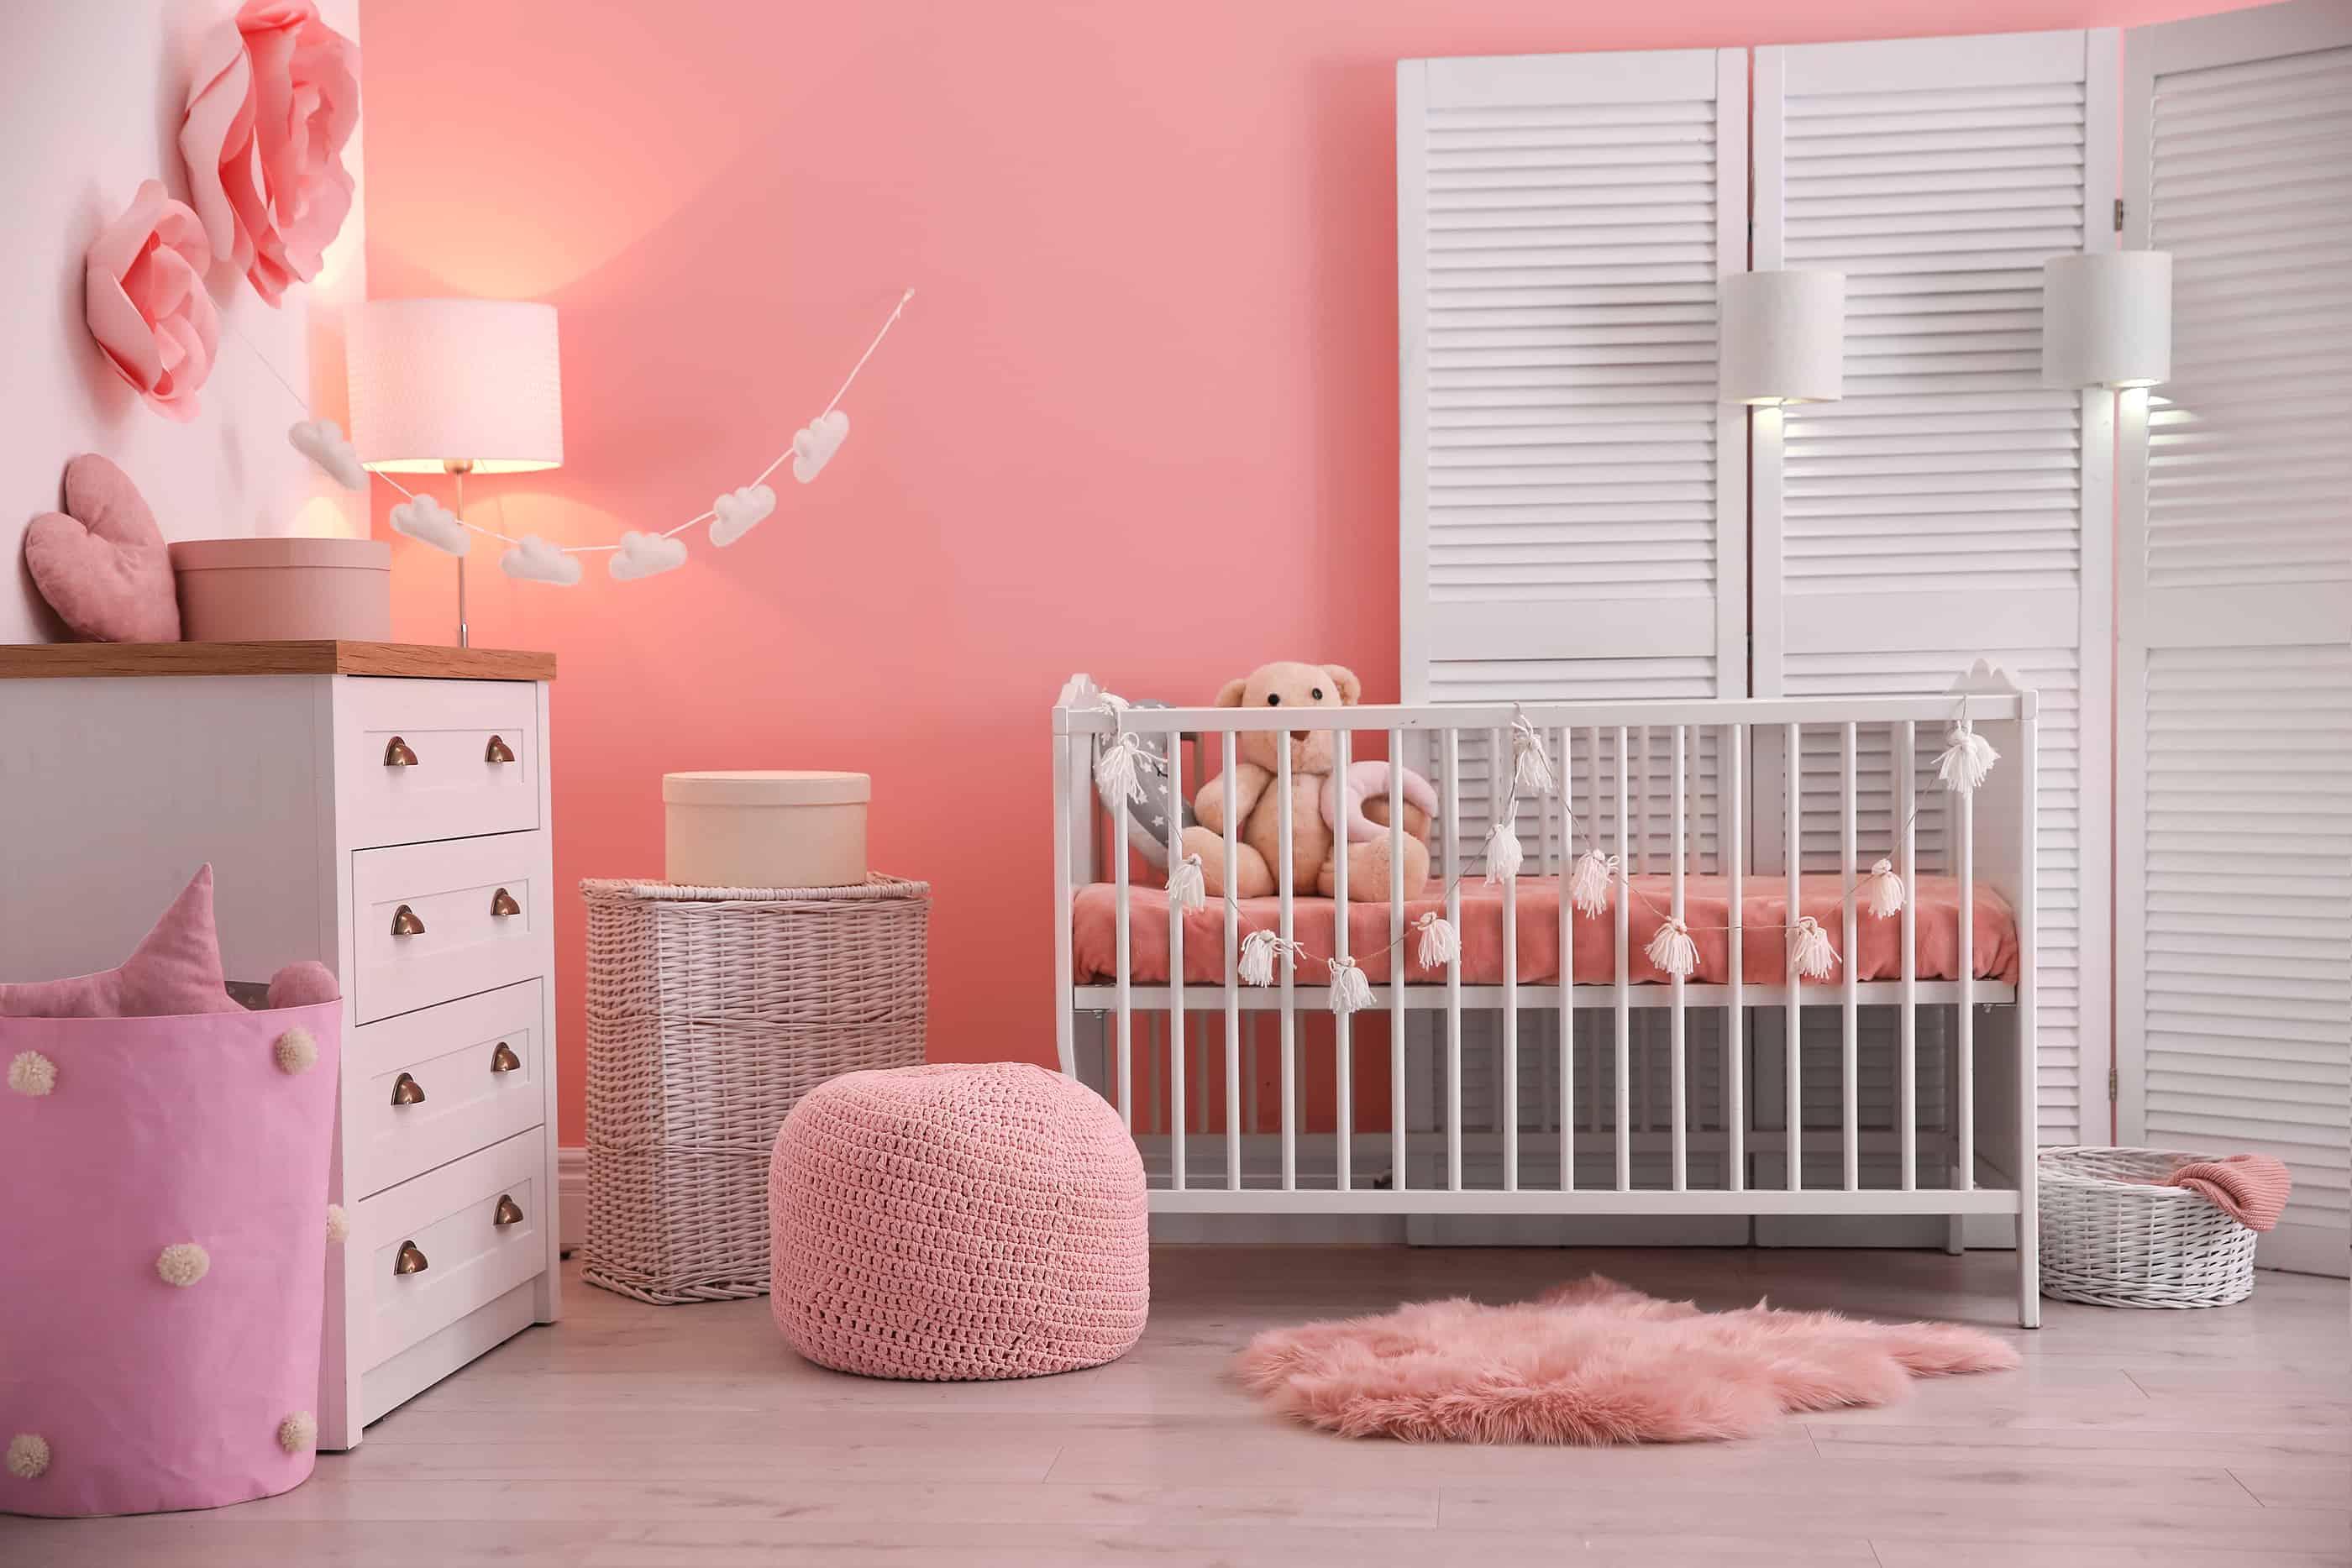 Baby Room Interior With Decorations And Comfortable Crib - Jones Paint